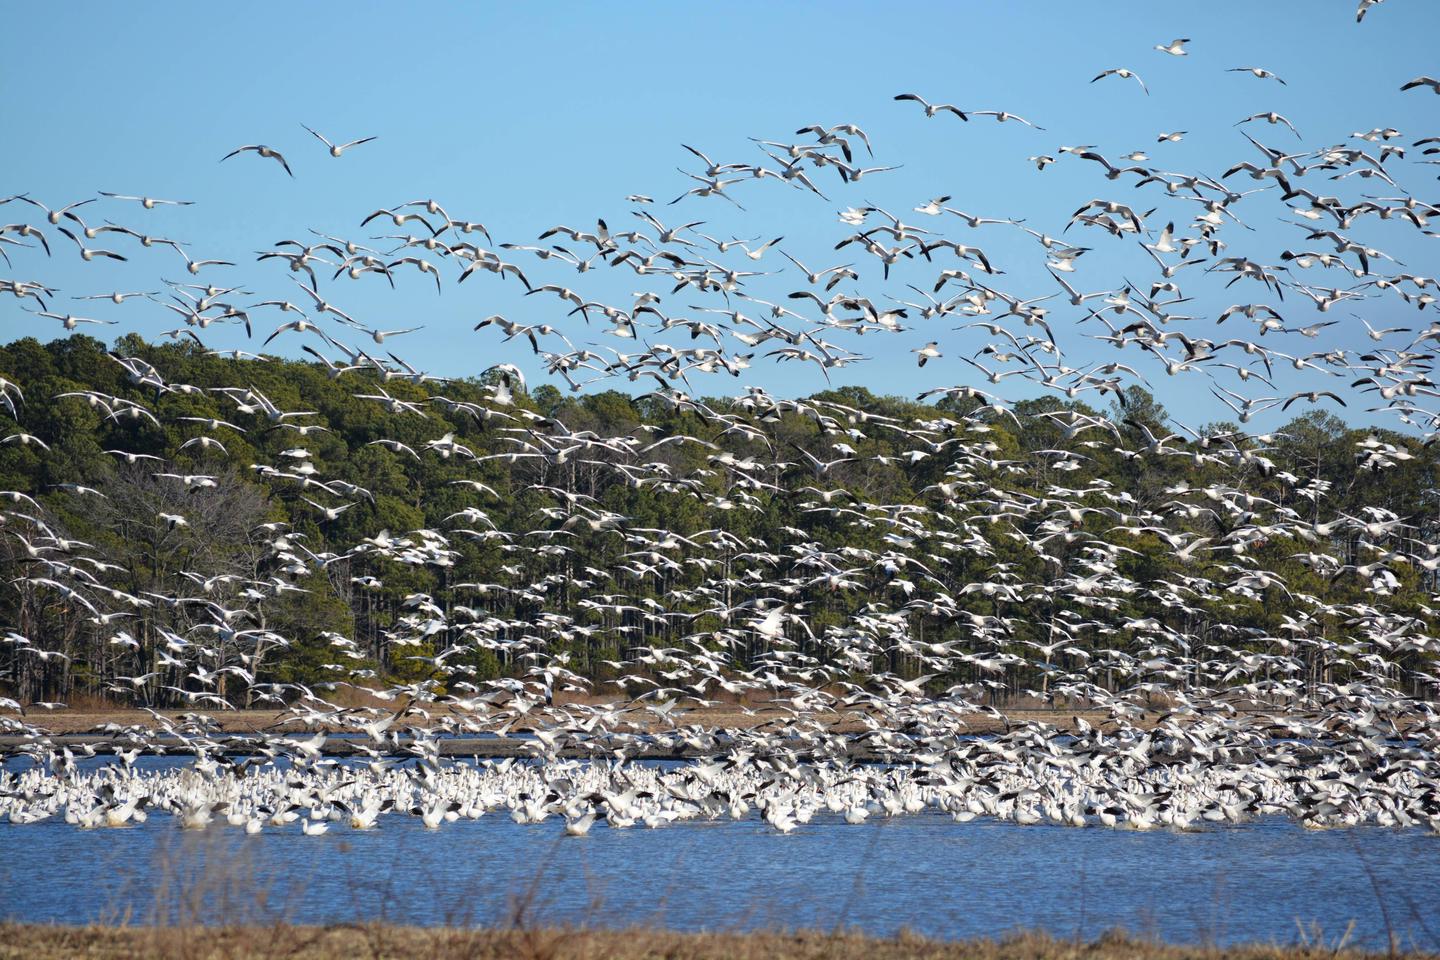 Snow geese taking off from a refuge impoundment.Snow geese leaving a refuge impoundment.